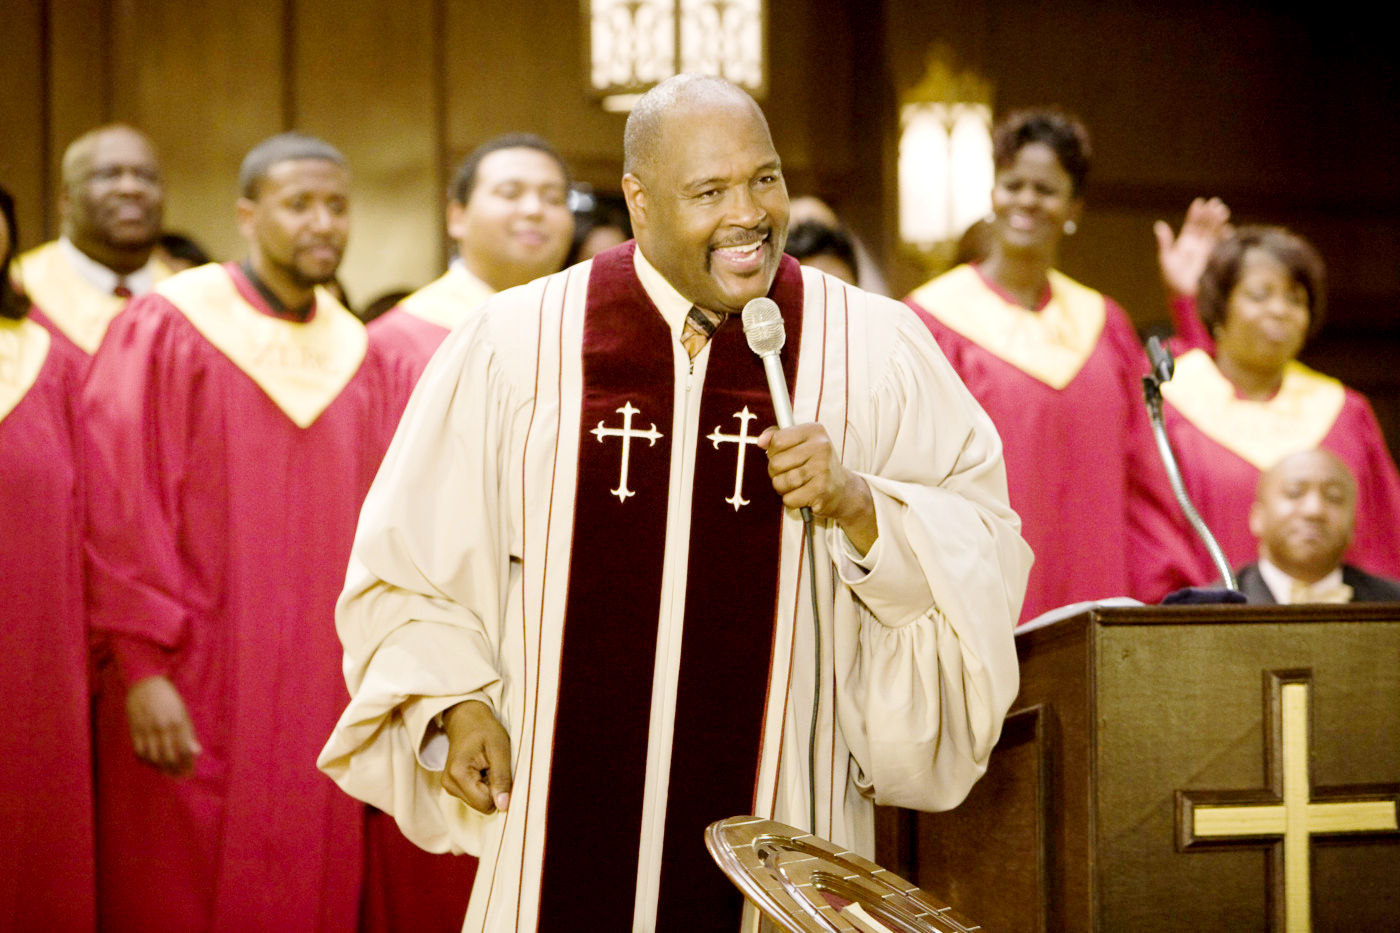 Marvin Winans stars as Pastor Brian in Lionsgate Films' I Can Do Bad All by Myself (2009)